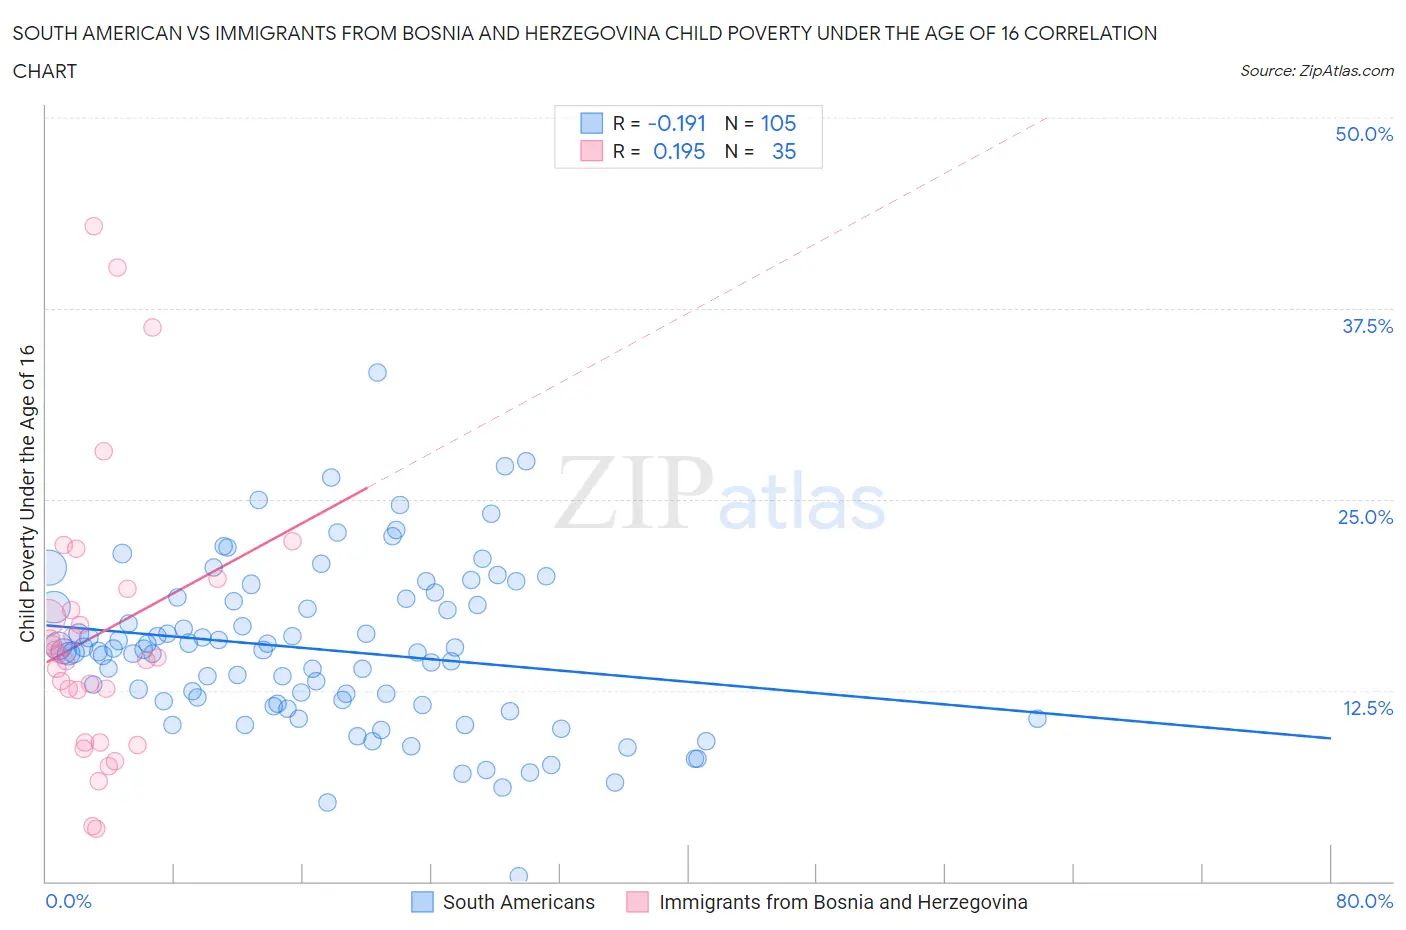 South American vs Immigrants from Bosnia and Herzegovina Child Poverty Under the Age of 16